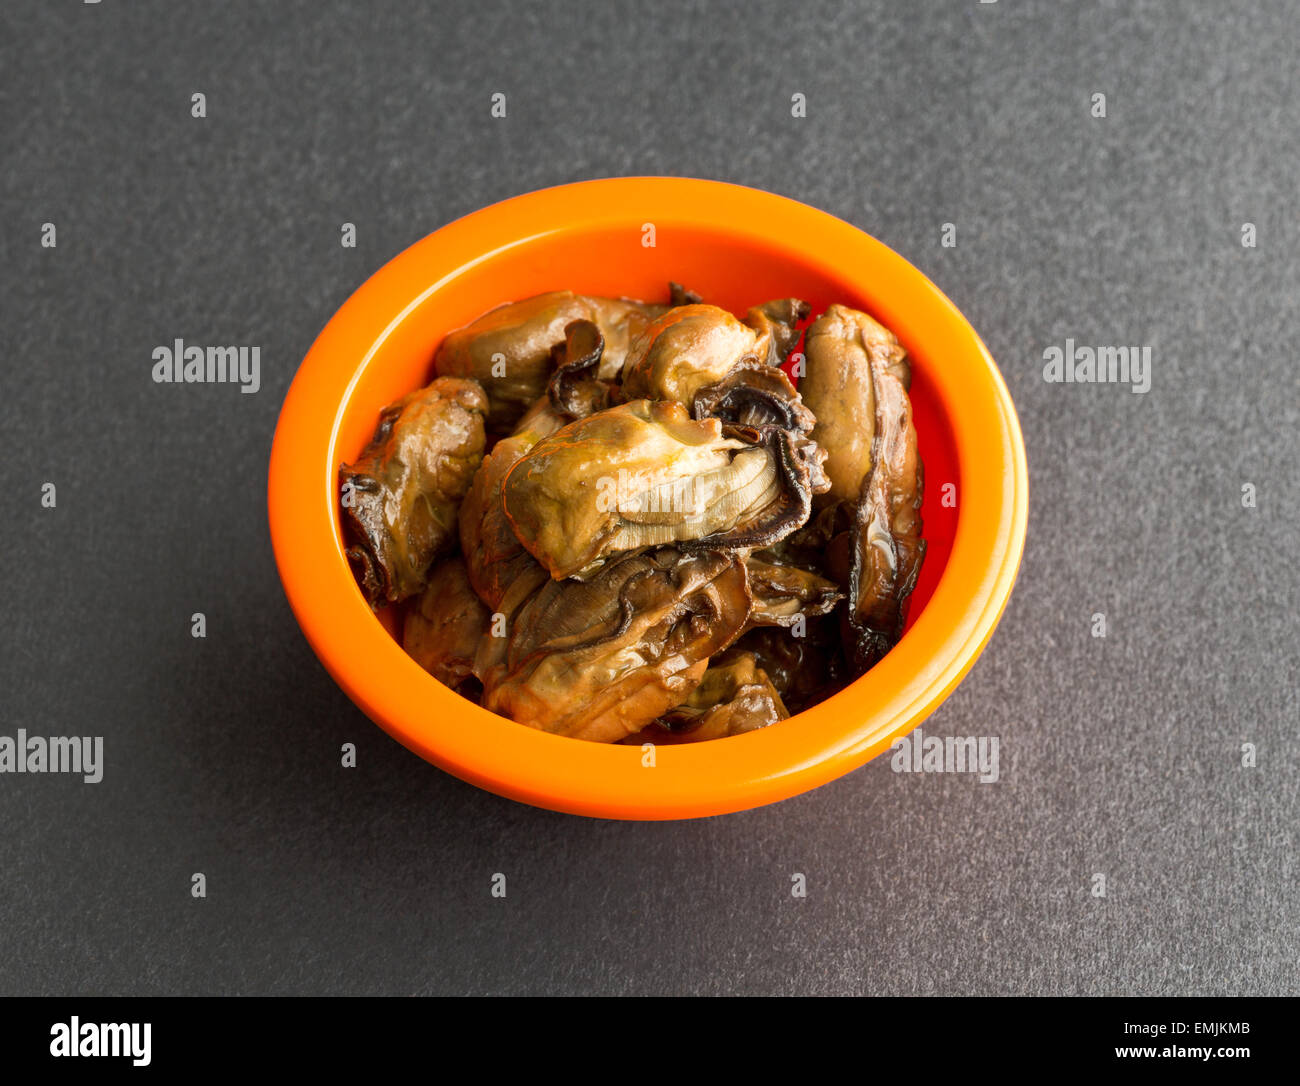 Several small whole smoked oysters in a bright orange bowl atop a black table top. Stock Photo